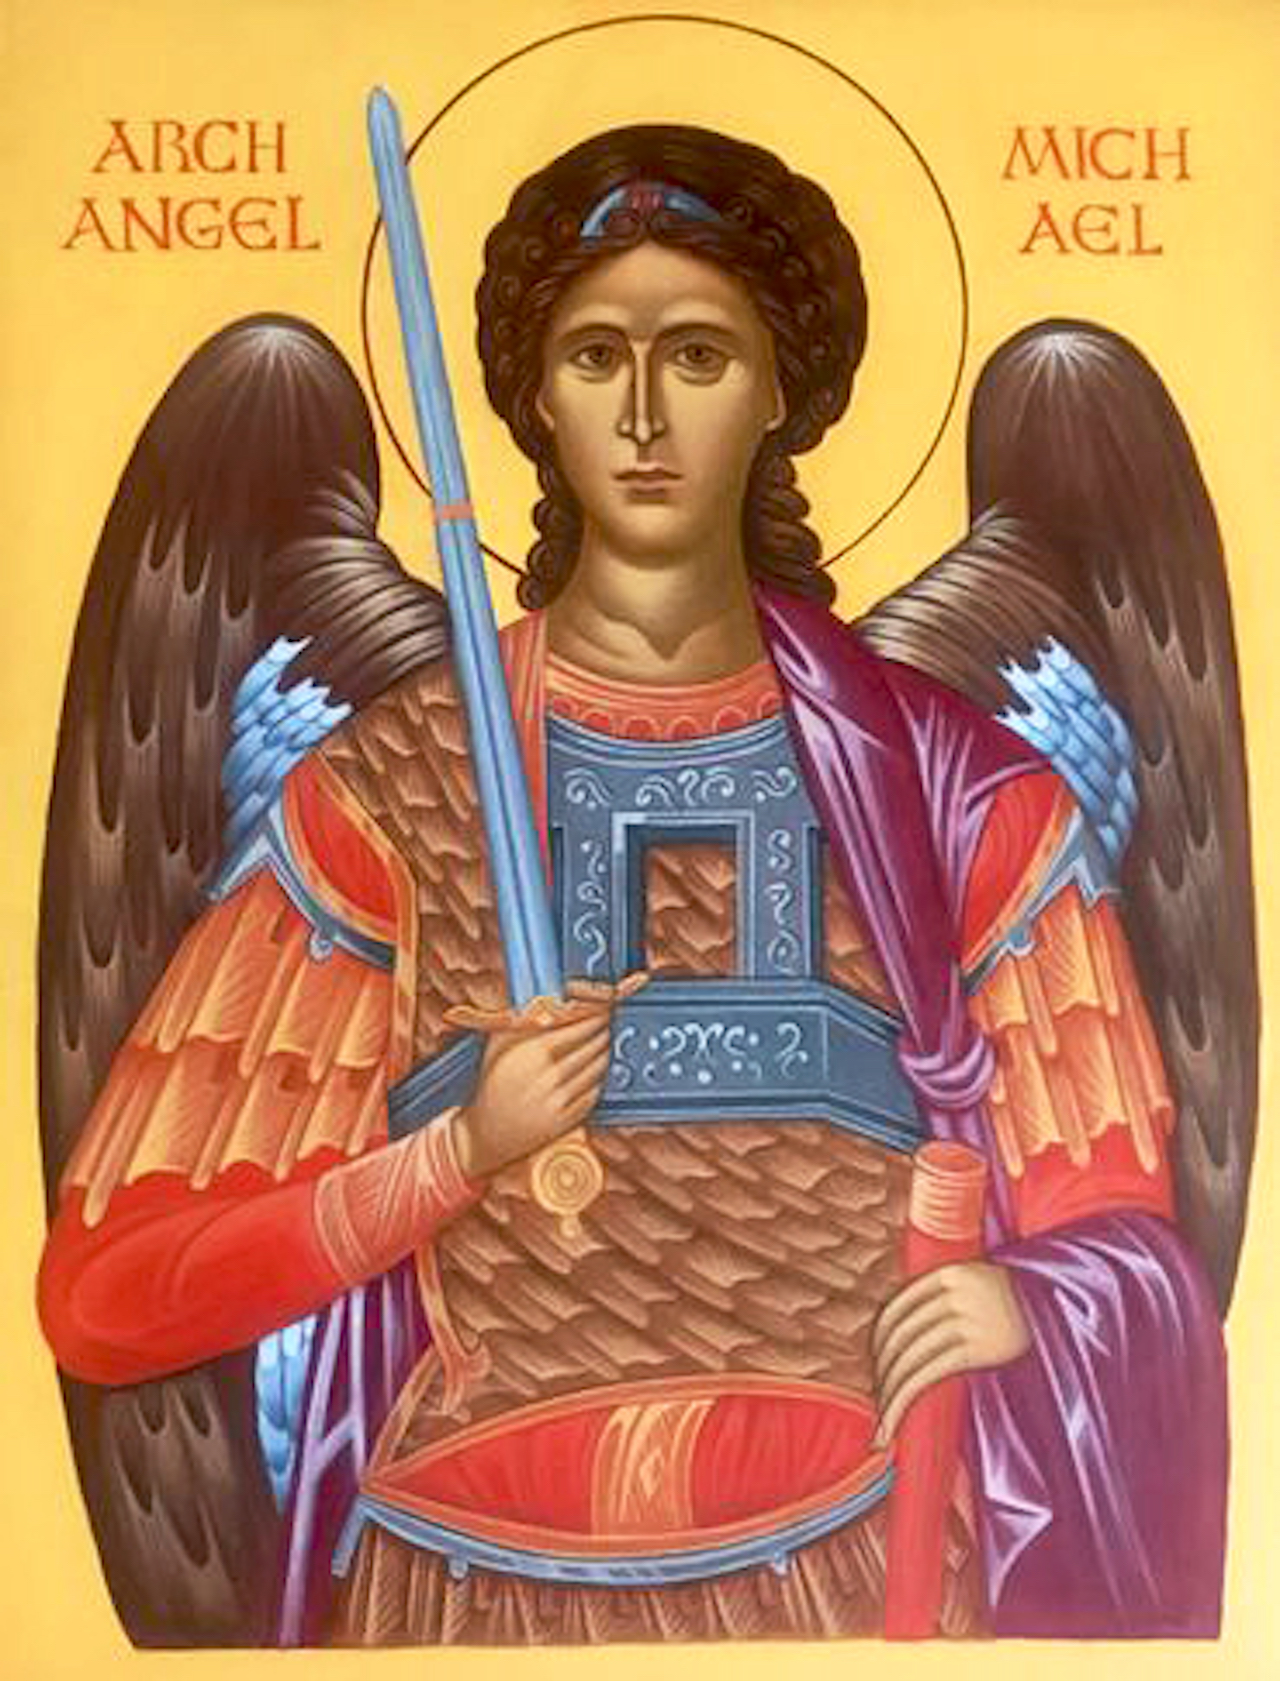 St. Michael the Archangel subject of this year’s iconography